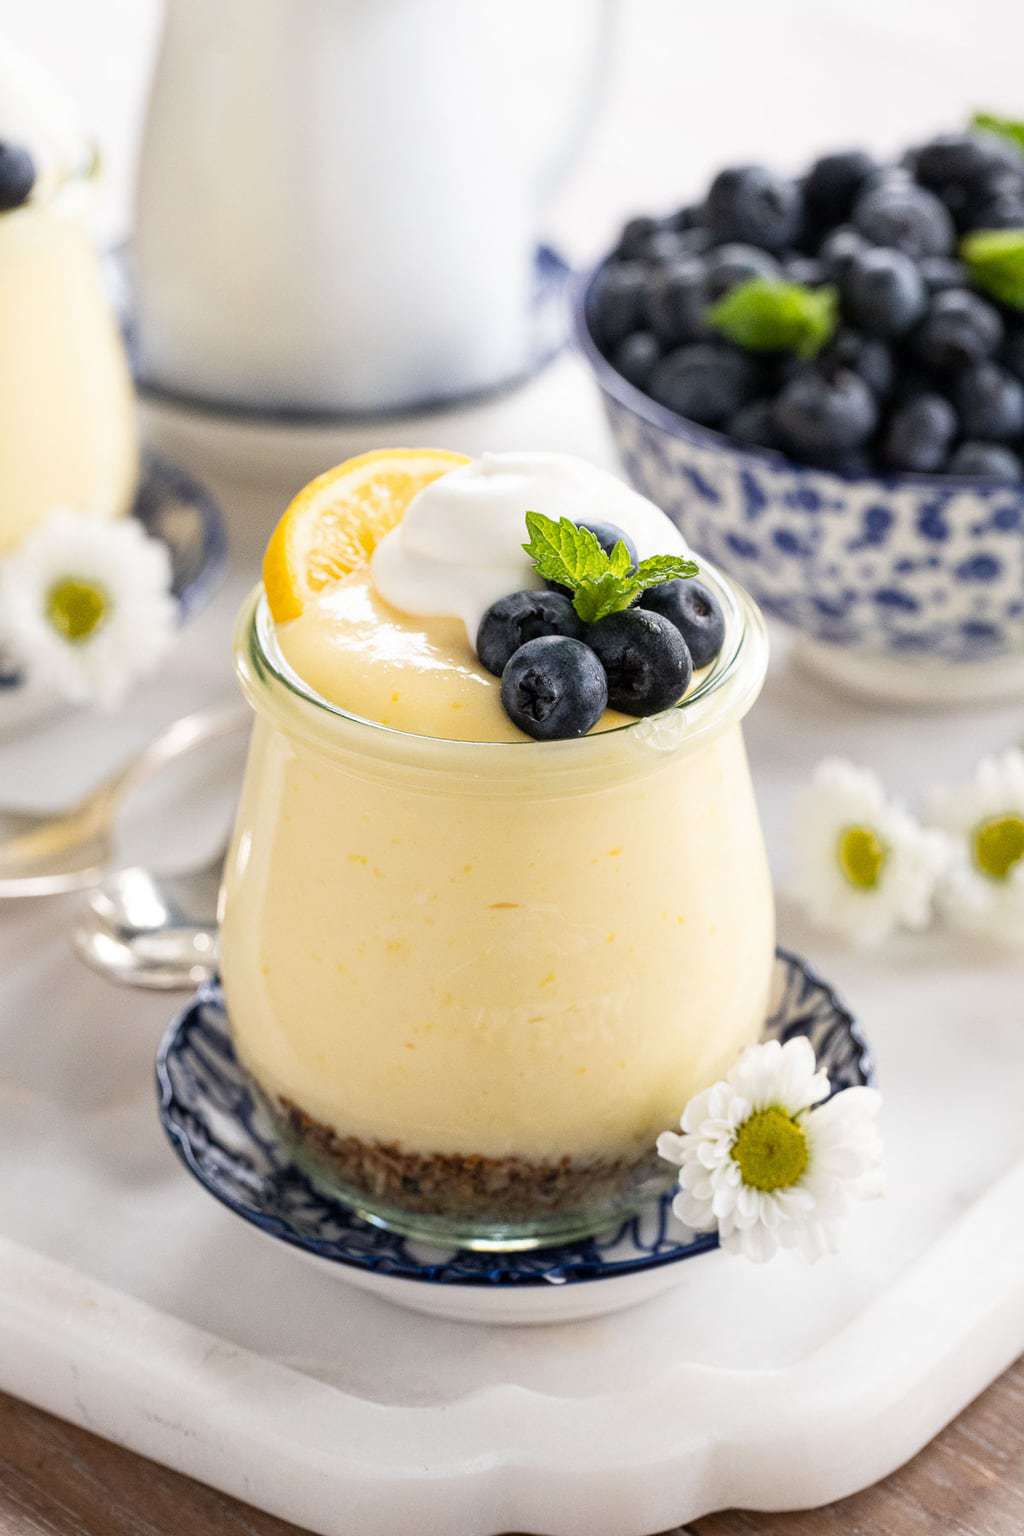 Vertical closeup photo of Easy Lemon Curd Mouse in a small glass Weck jar garnished with a lemon wedge, blueberries, mint leaves and whipped cream.